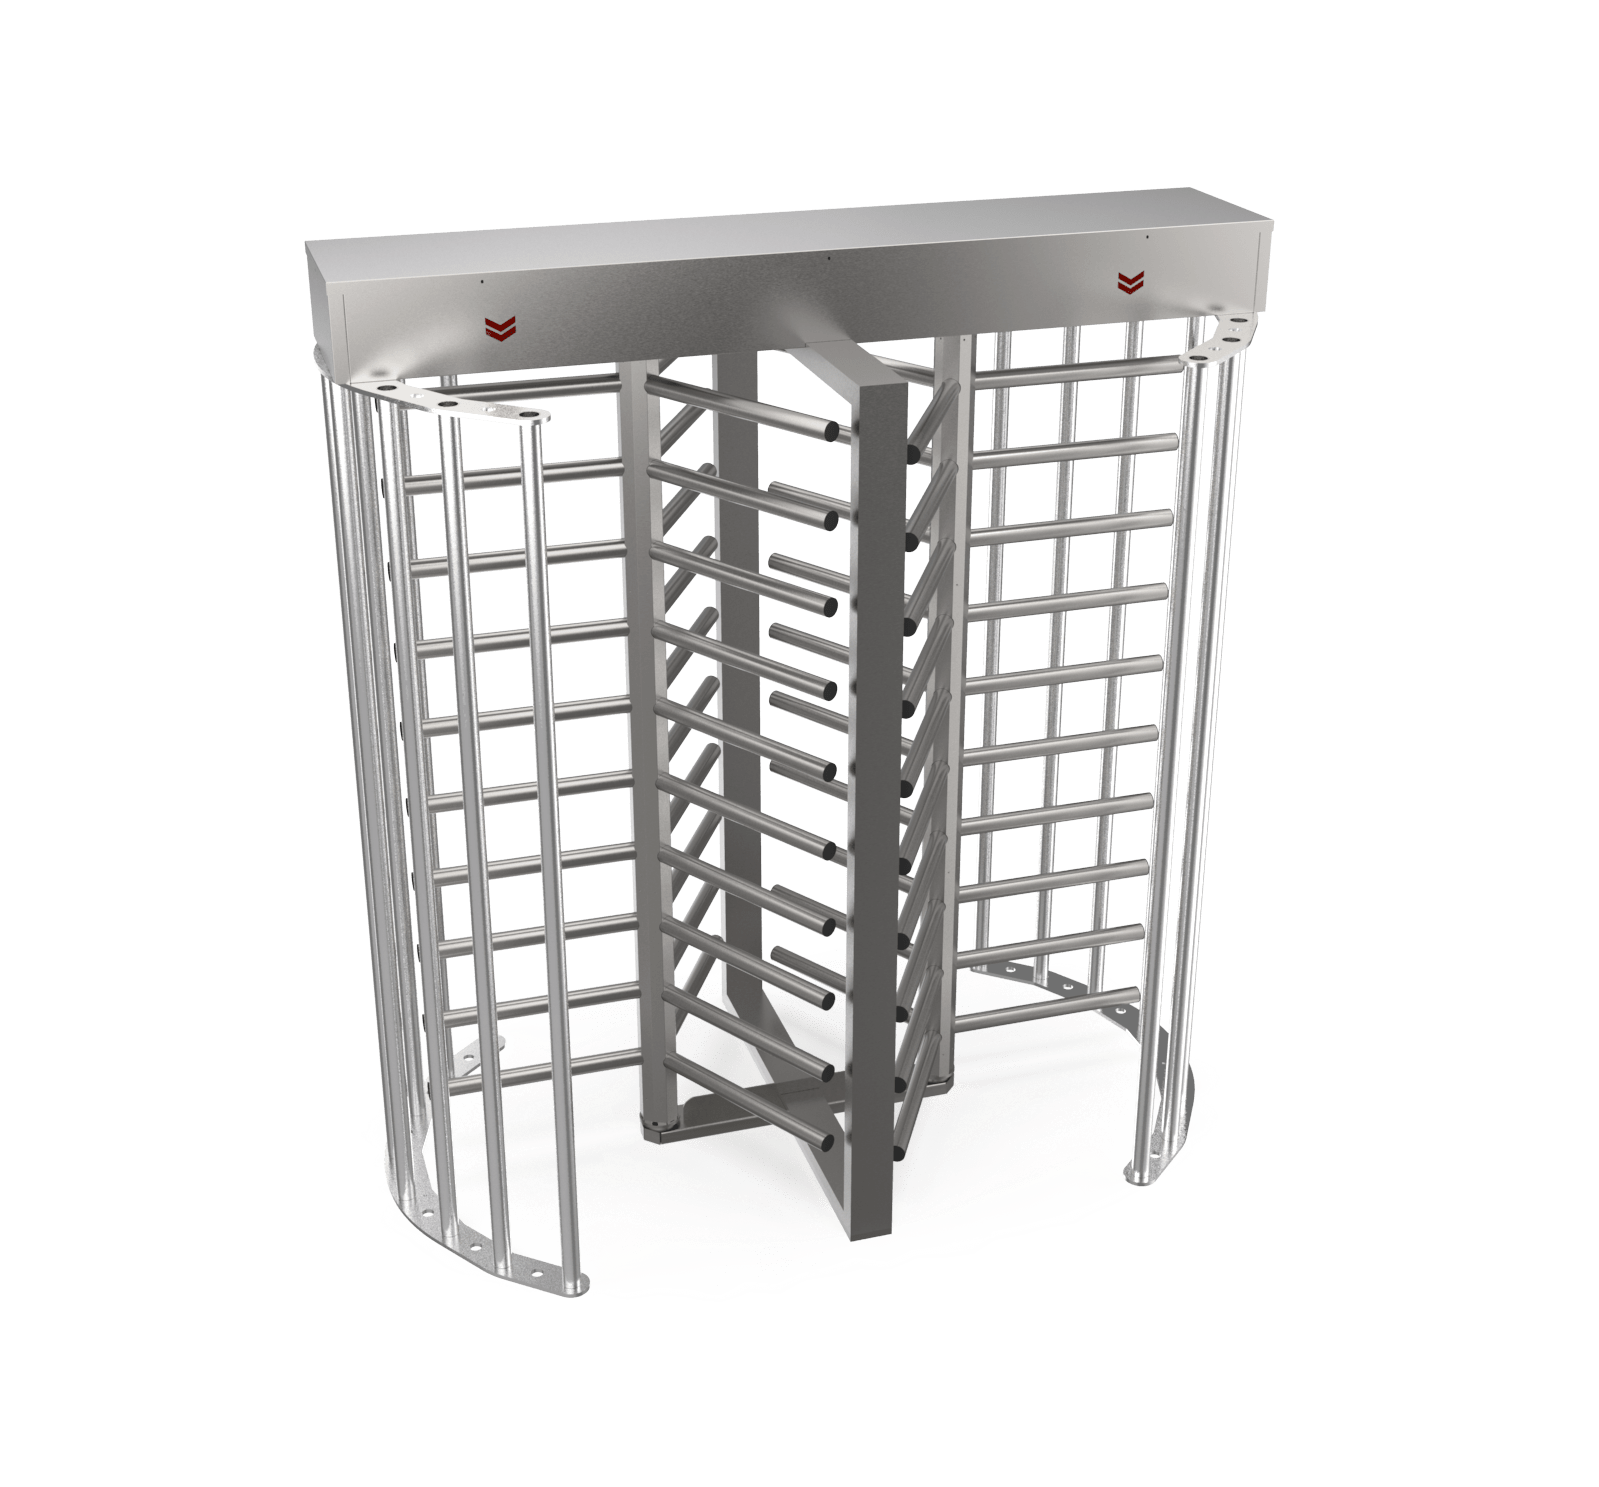 3 Arms Double Stainless Steel Full Height Turnstile